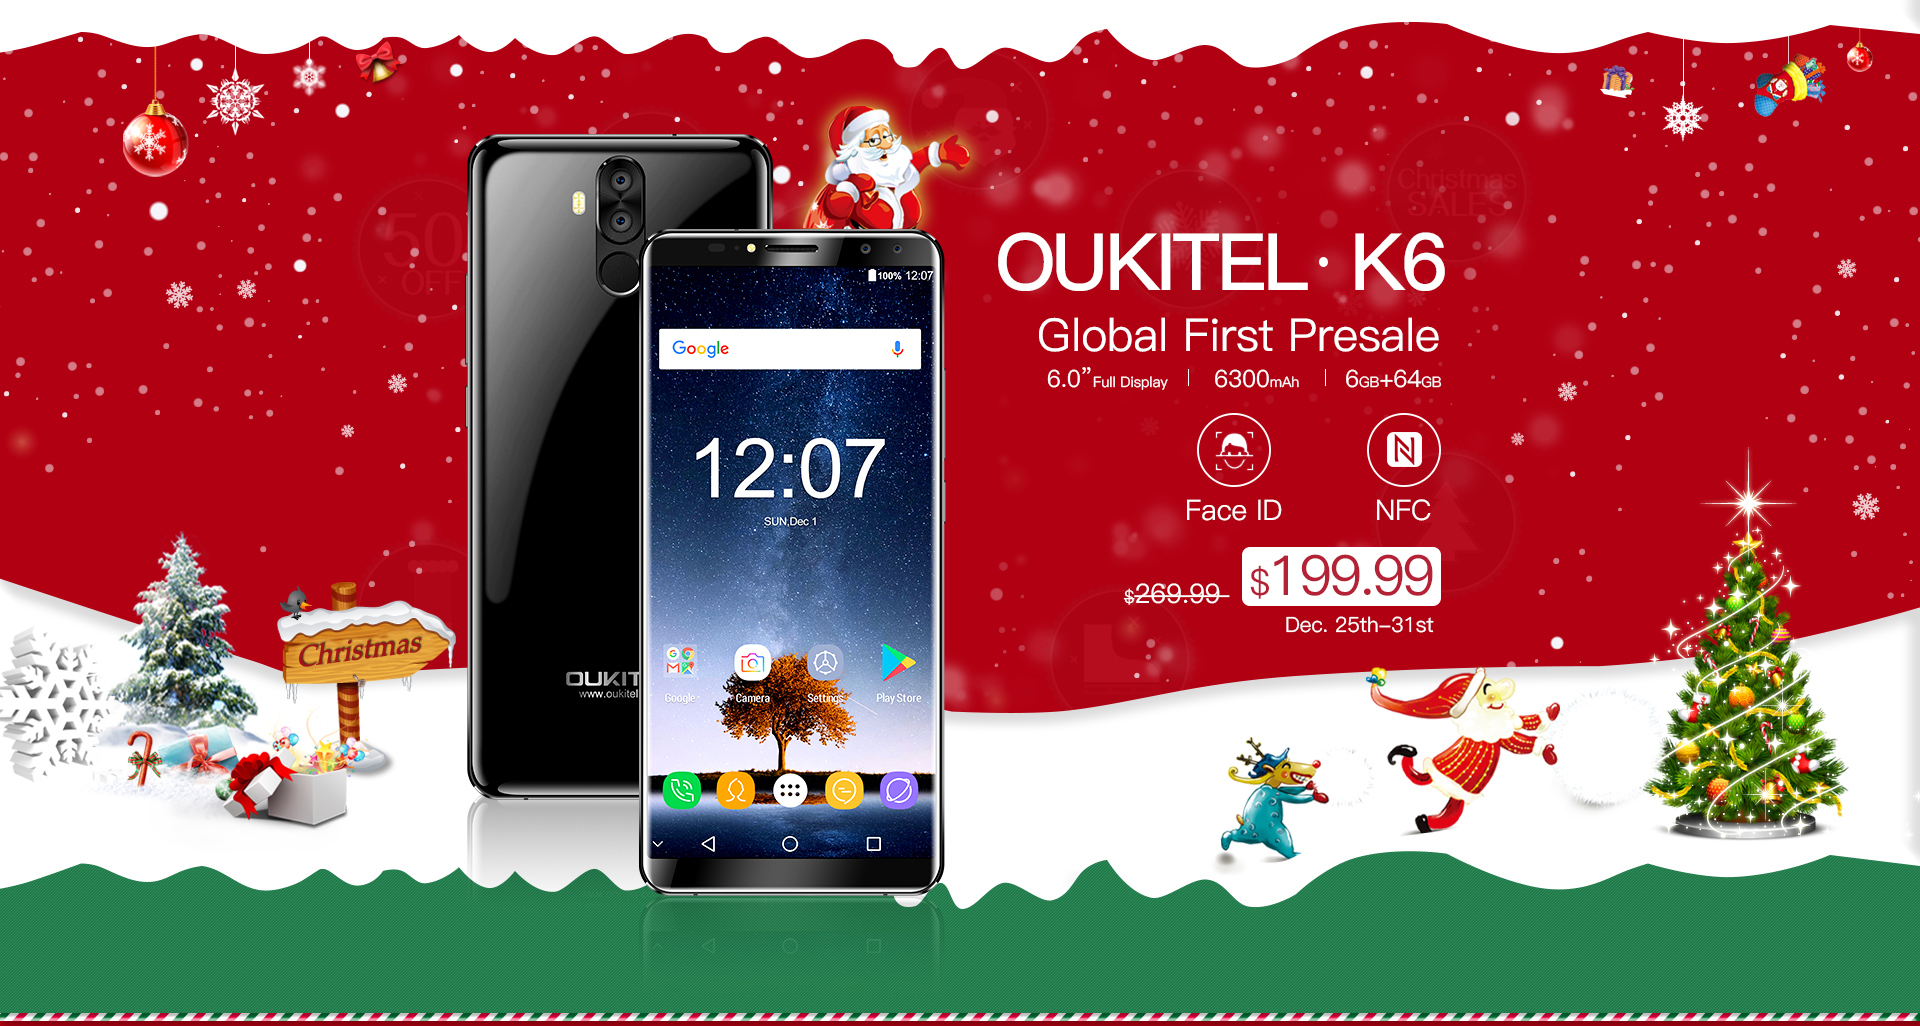 OUKITEL K6 went on sale at the special price